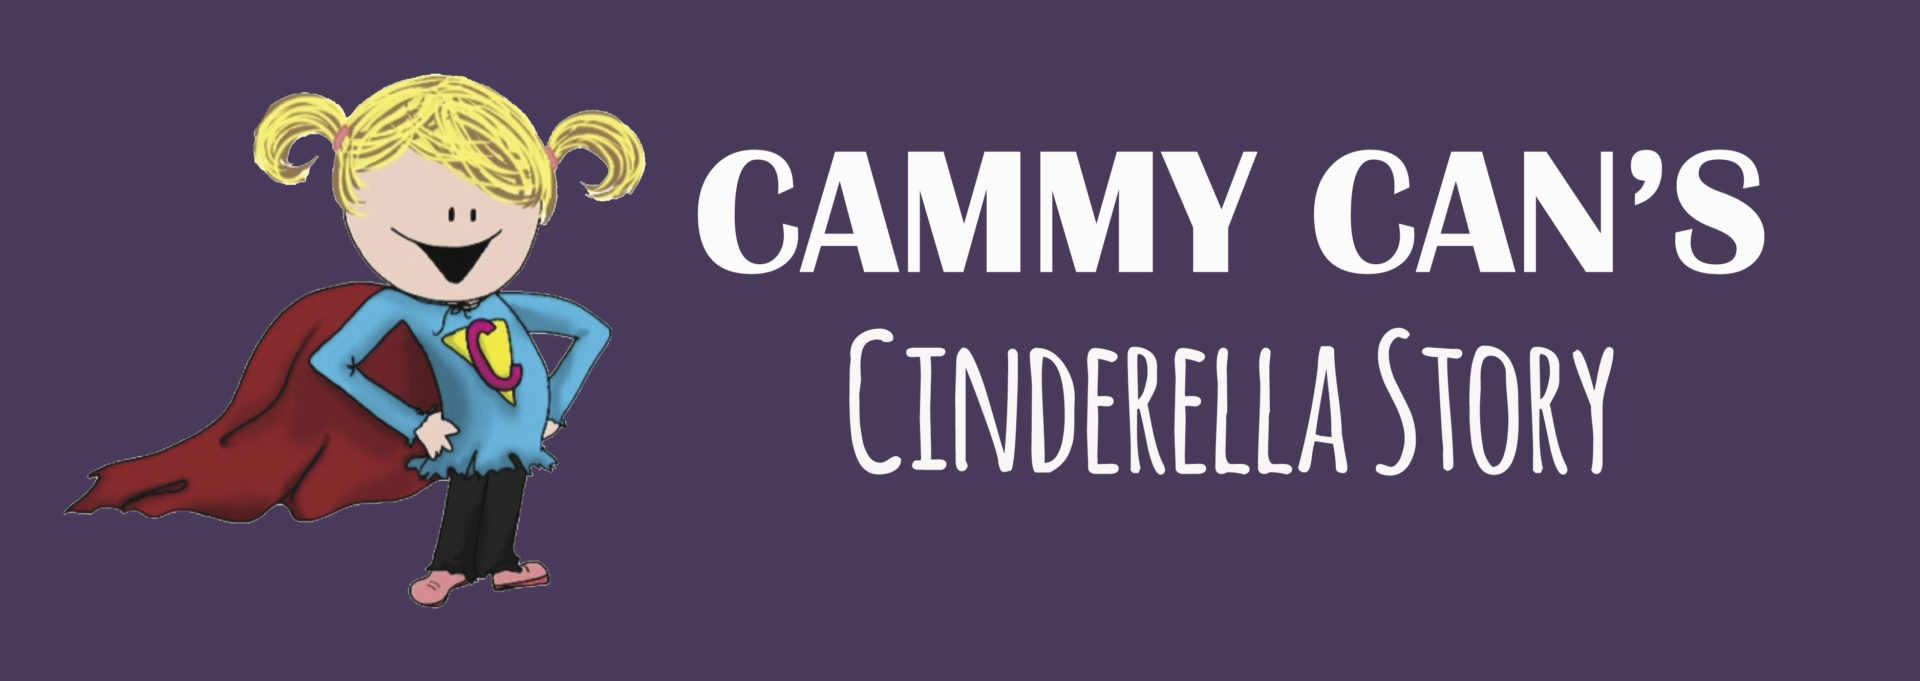 Cammy Can's Cinderella Story - 10th (almost) Annual